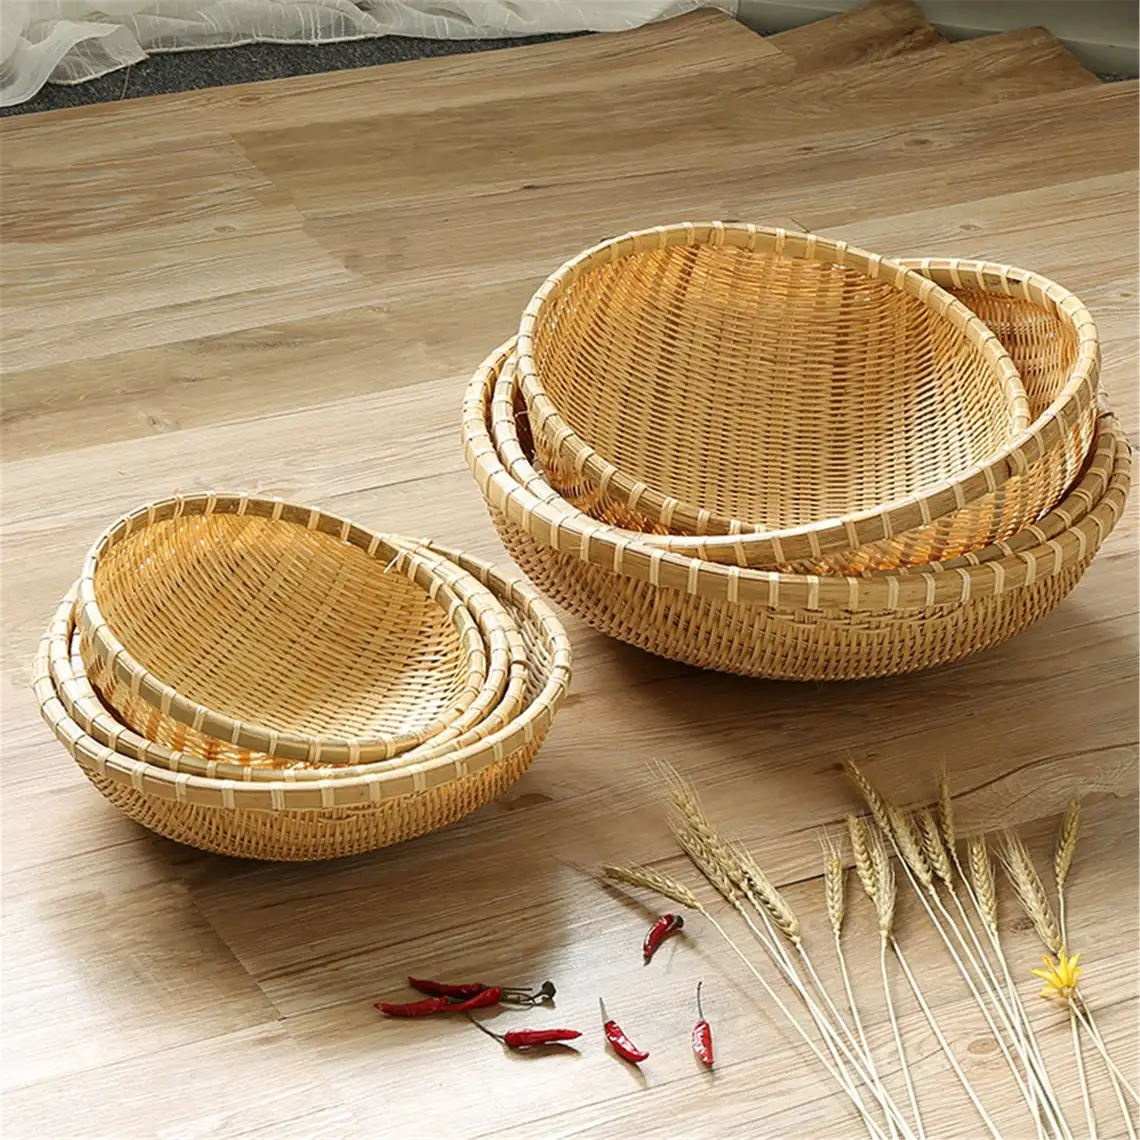 Bamboo basket woven placemat, round braided fruit basket made in Vietnam